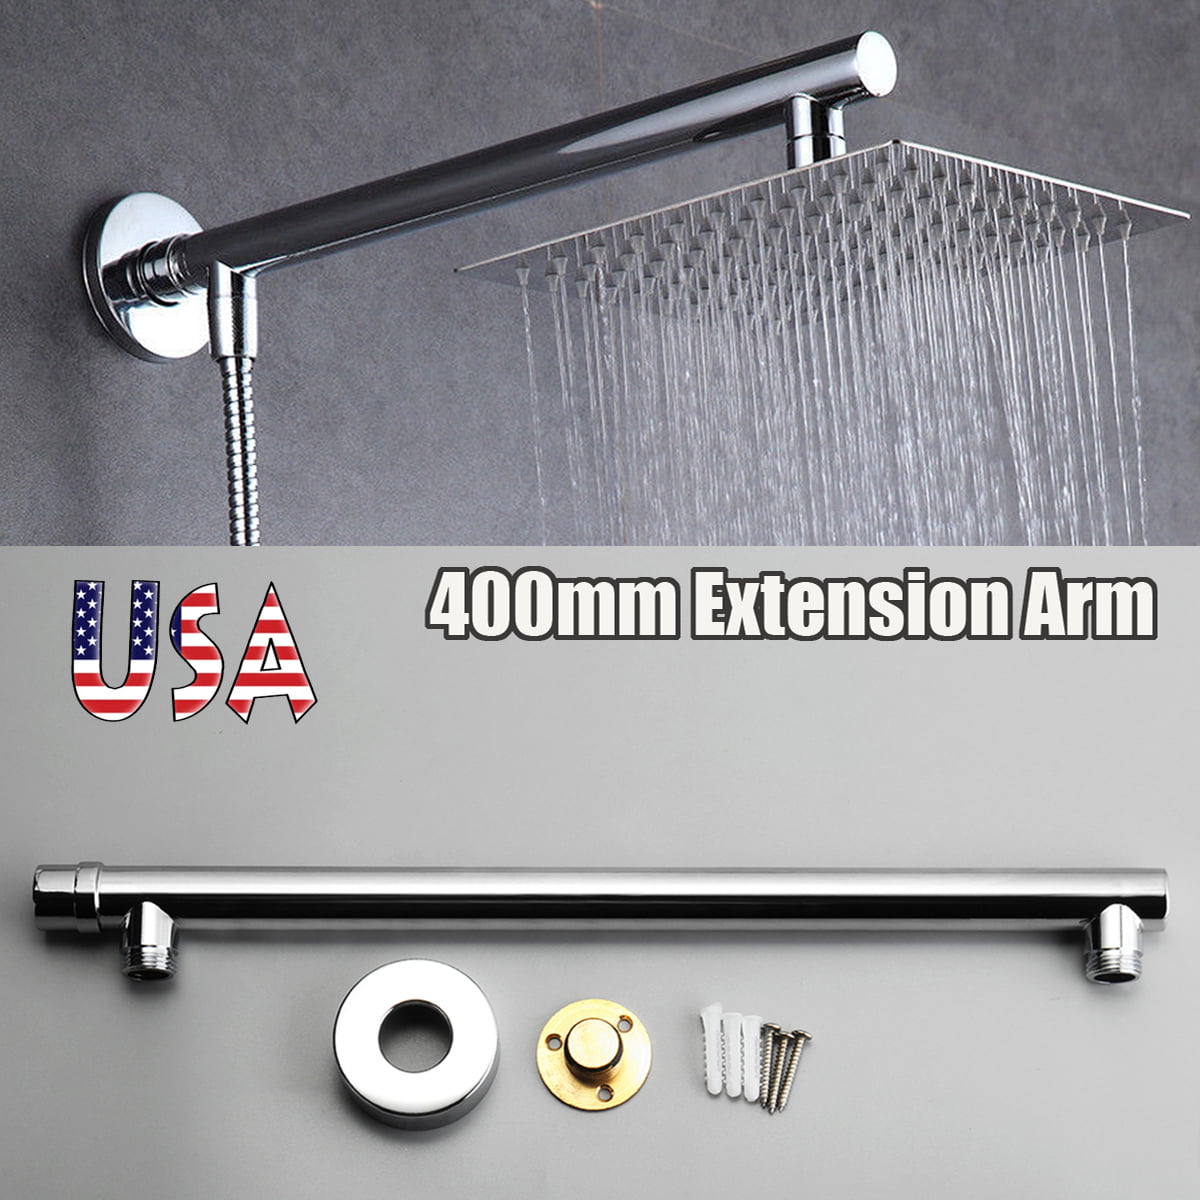 13 inch Bathroom Stainless Steel Rainfall Shower Head Extension Arm Wall Mounted